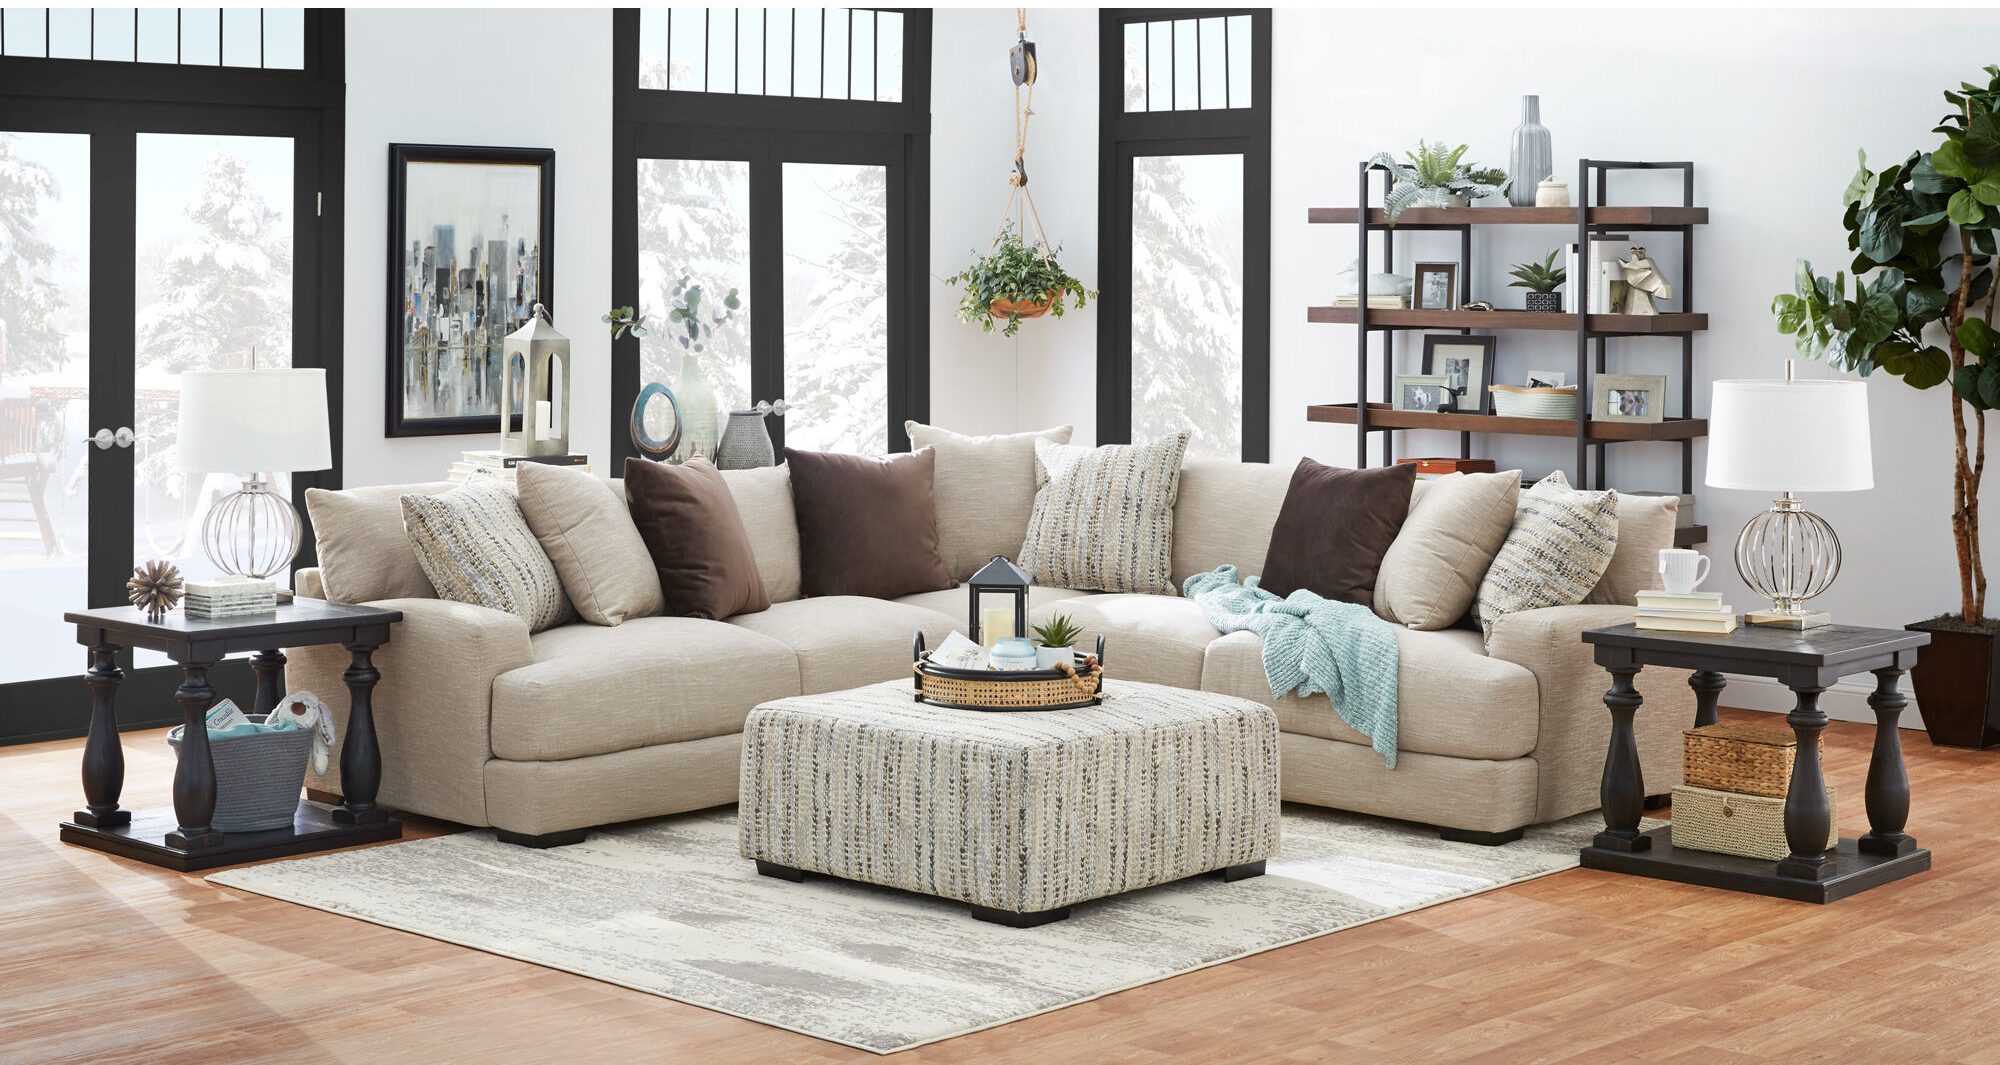 20+ Online Stores Like Wayfair for Stylish Furniture & Decor in 2023